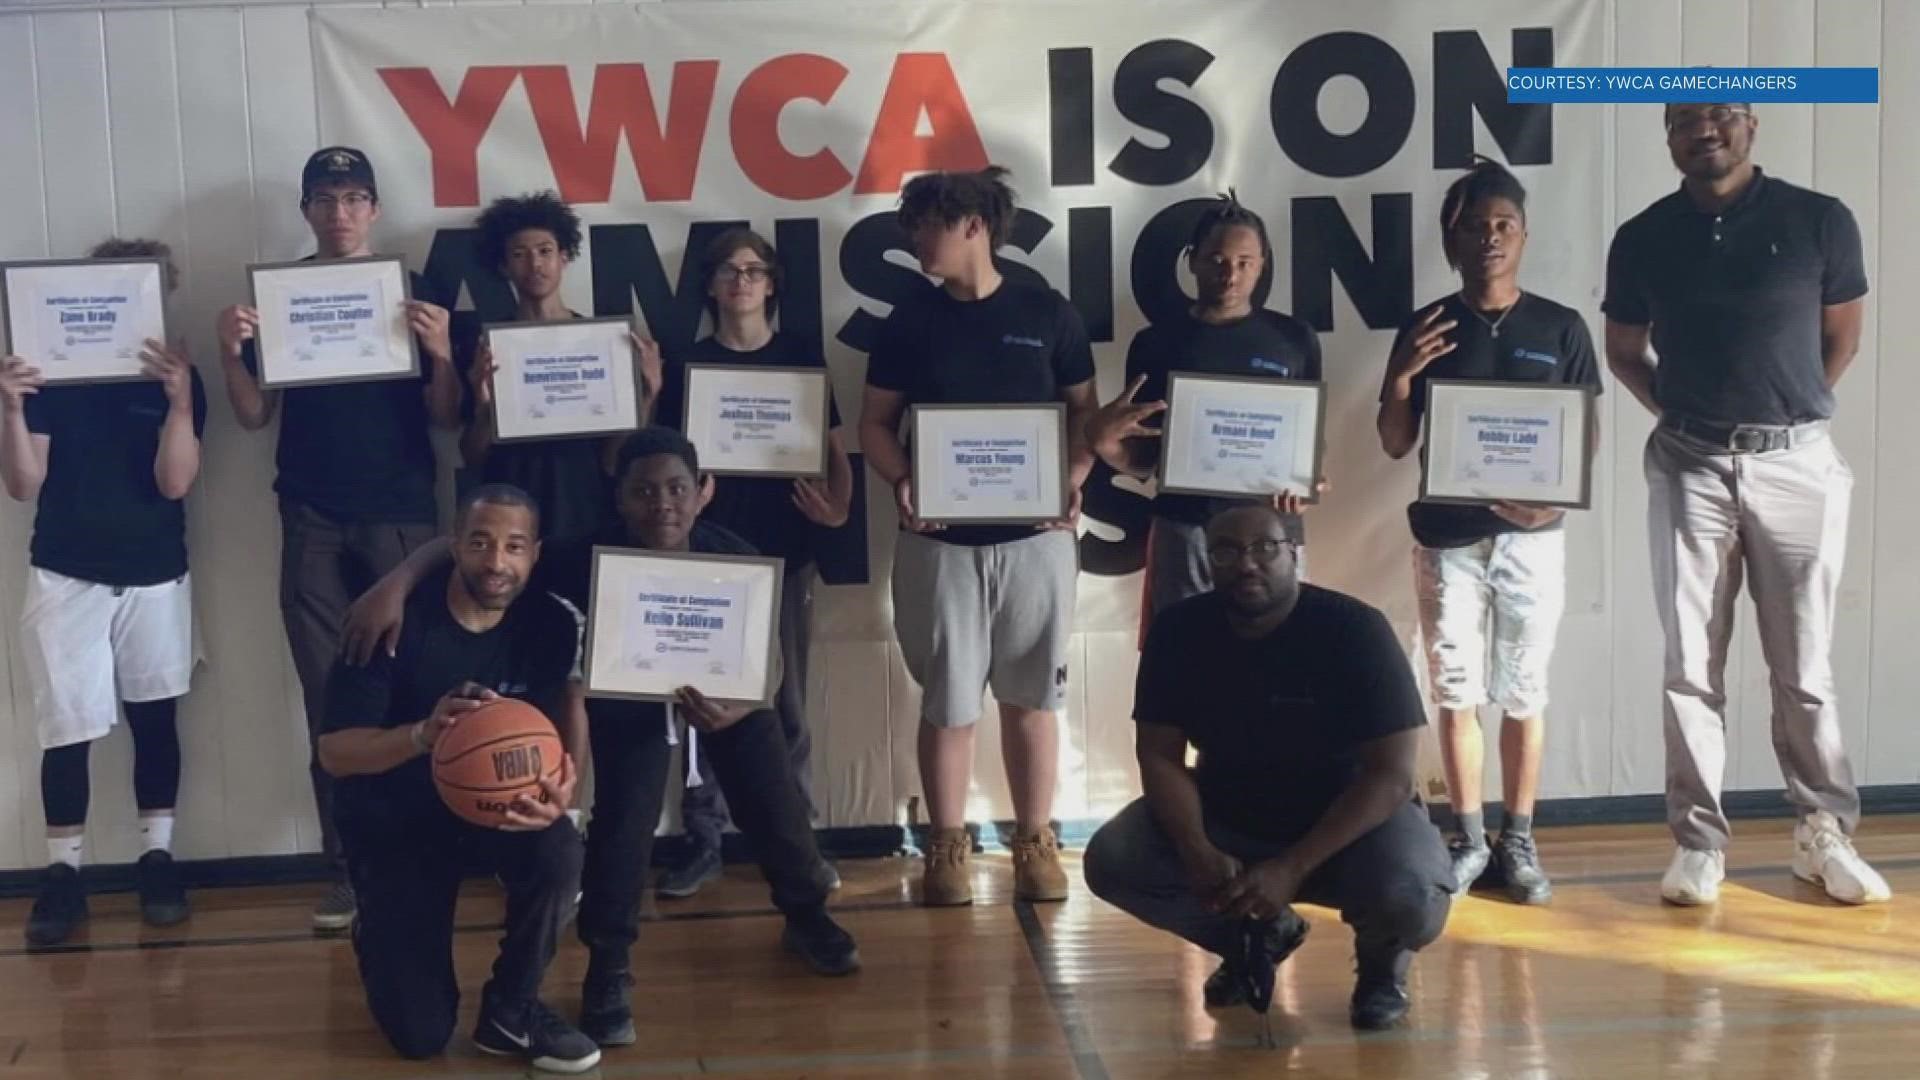 The YWCA Game Changers is a gender-based violence prevention program that works to mentor middle-school boys in east Tennessee to prevent violence against women.